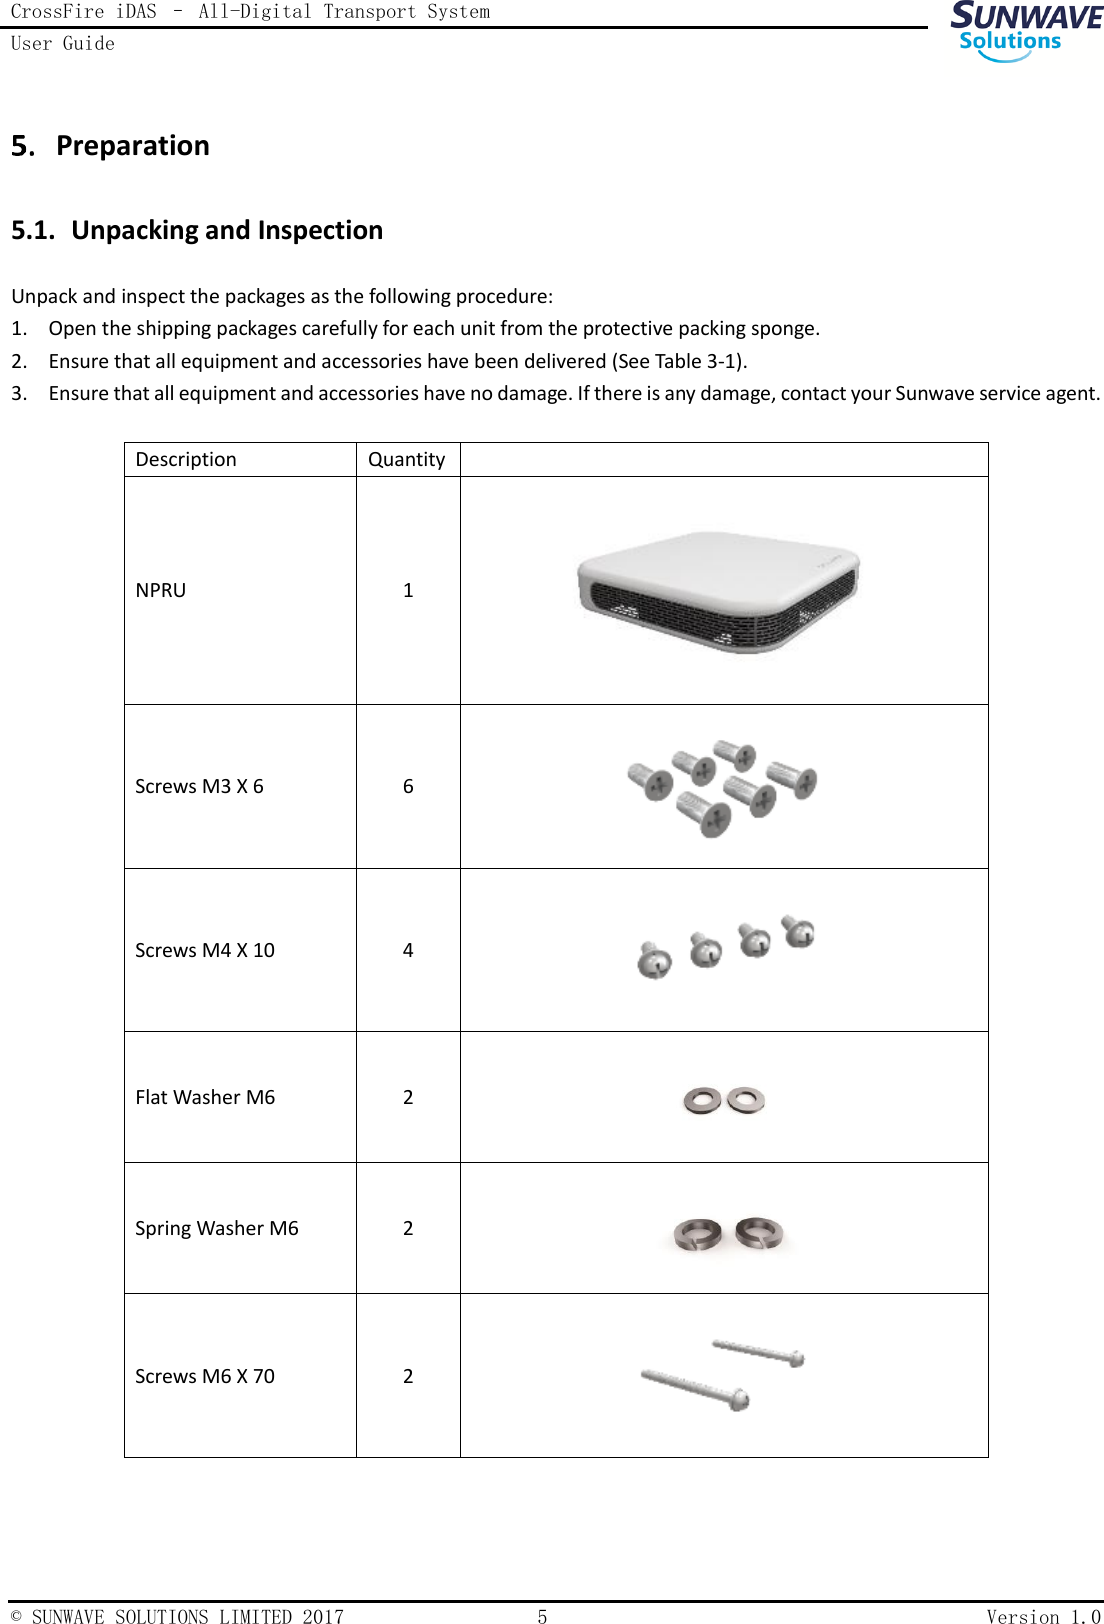 CrossFire iDAS – All-Digital Transport System User Guide    © SUNWAVE SOLUTIONS LIMITED 2017  5  Version 1.0   Preparation 5.1. Unpacking and Inspection  Unpack and inspect the packages as the following procedure: 1. Open the shipping packages carefully for each unit from the protective packing sponge. 2. Ensure that all equipment and accessories have been delivered (See Table 3-1). 3. Ensure that all equipment and accessories have no damage. If there is any damage, contact your Sunwave service agent.  Description Quantity  NPRU 1  Screws M3 X 6 6  Screws M4 X 10 4  Flat Washer M6 2  Spring Washer M6 2  Screws M6 X 70 2  